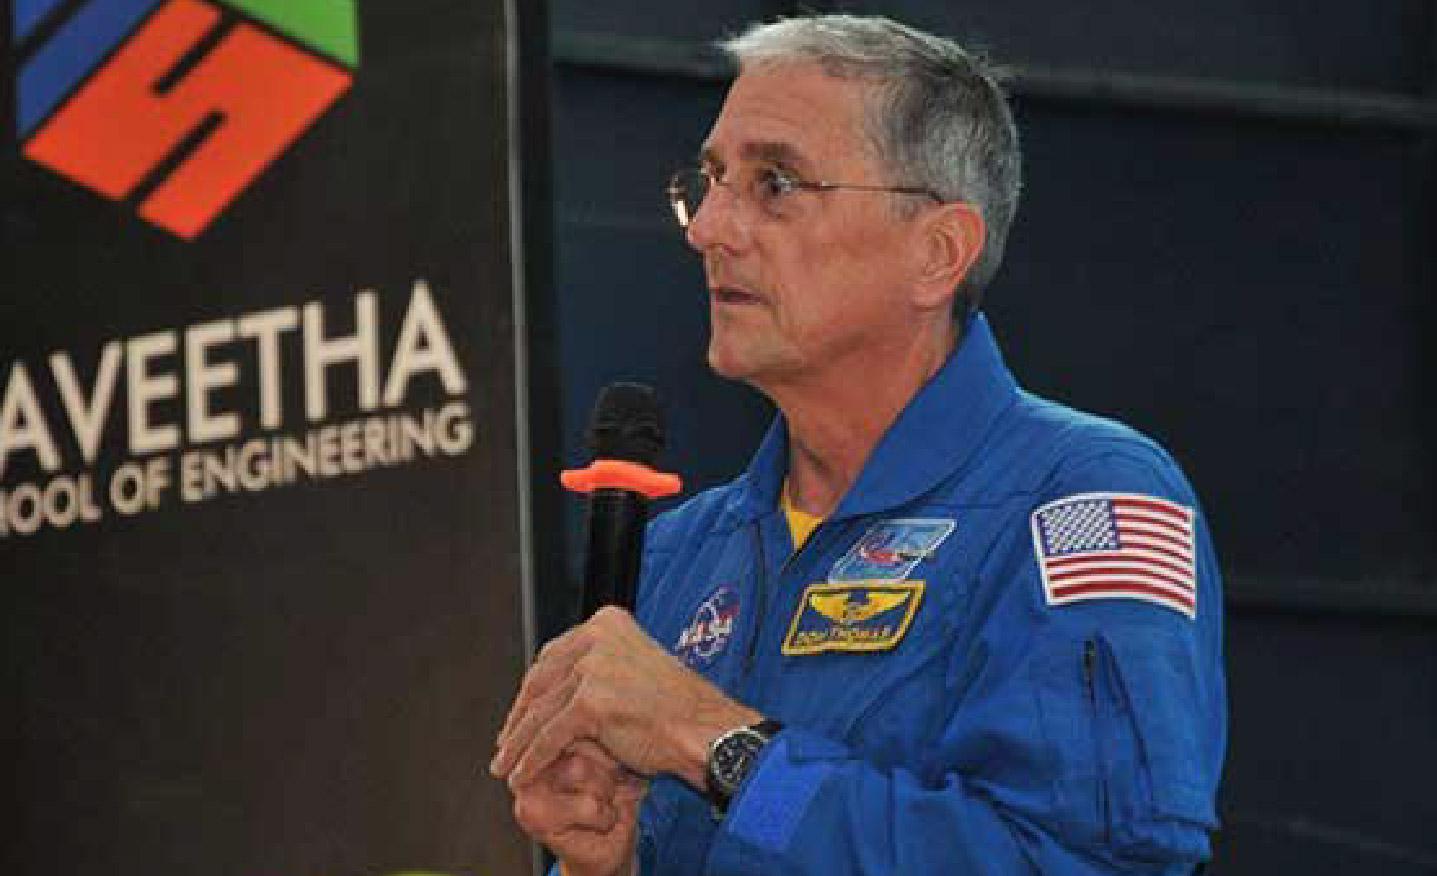 The number one lesson I have learnt in my life is to never give up: Donald Thomas talks about becoming a NASA astronaut